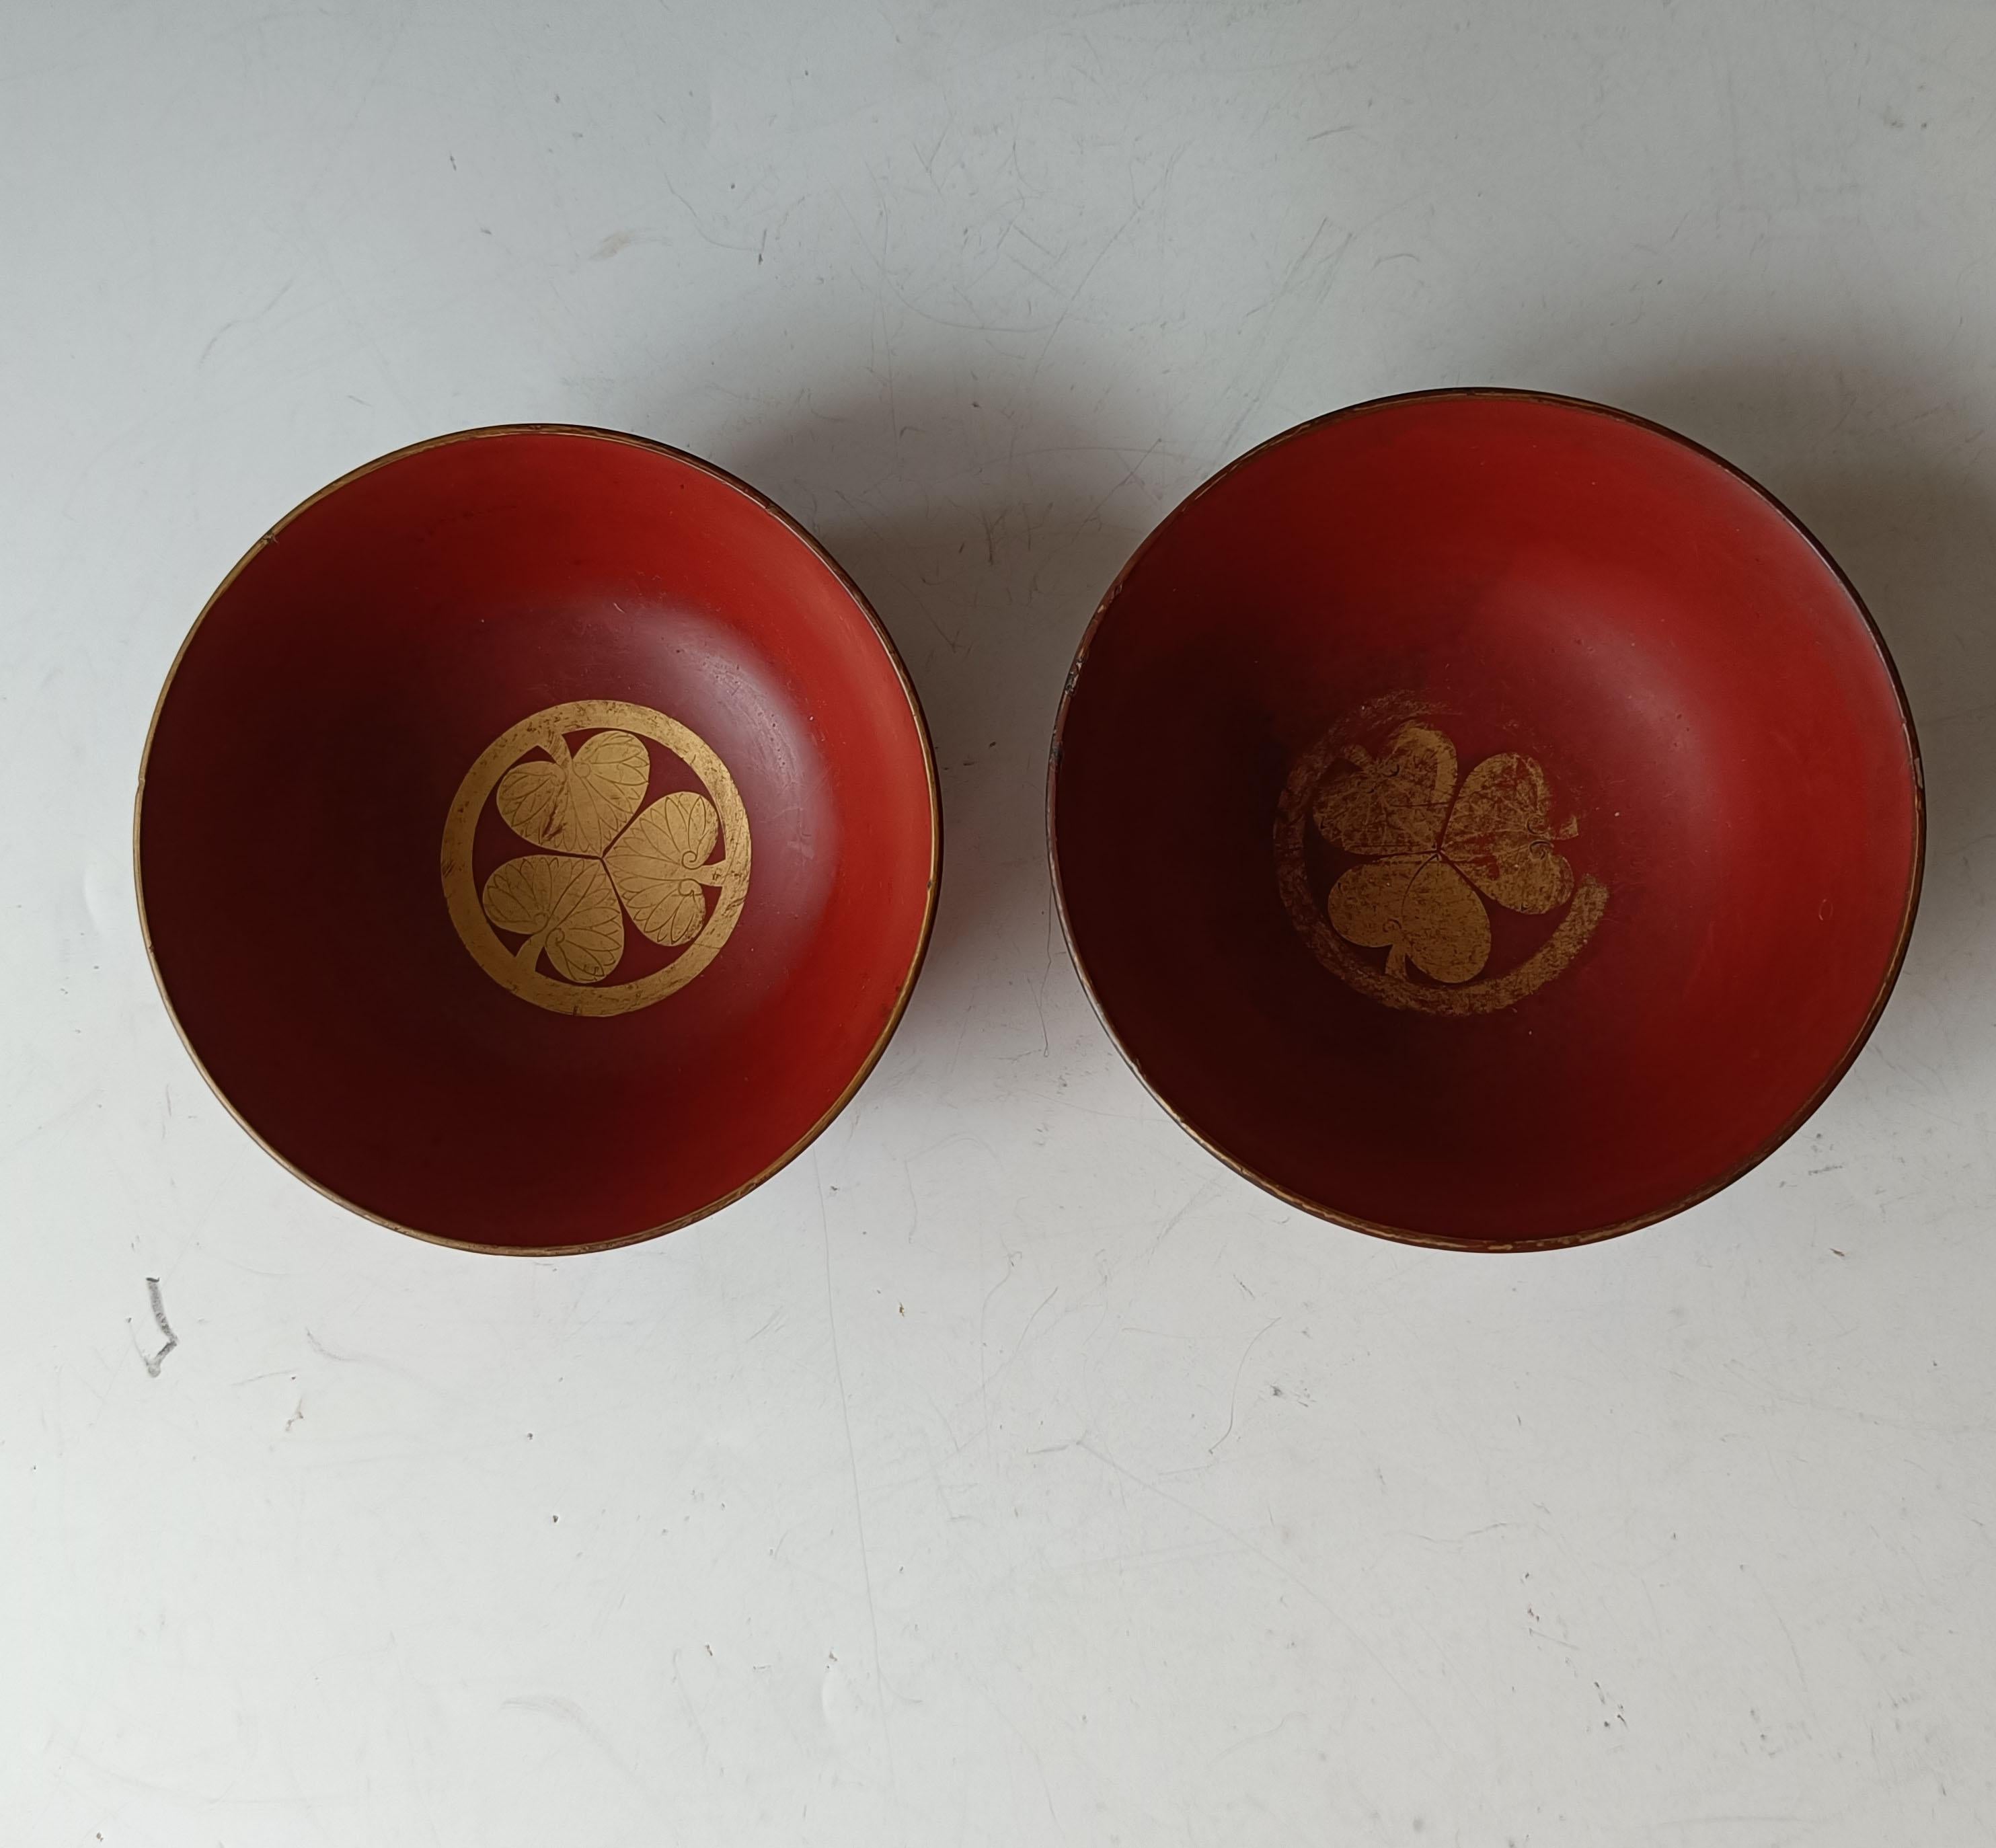 Carved Japanese Lacquered Wood Bowls 19th Century Asian Antiques 中国古董 For Sale